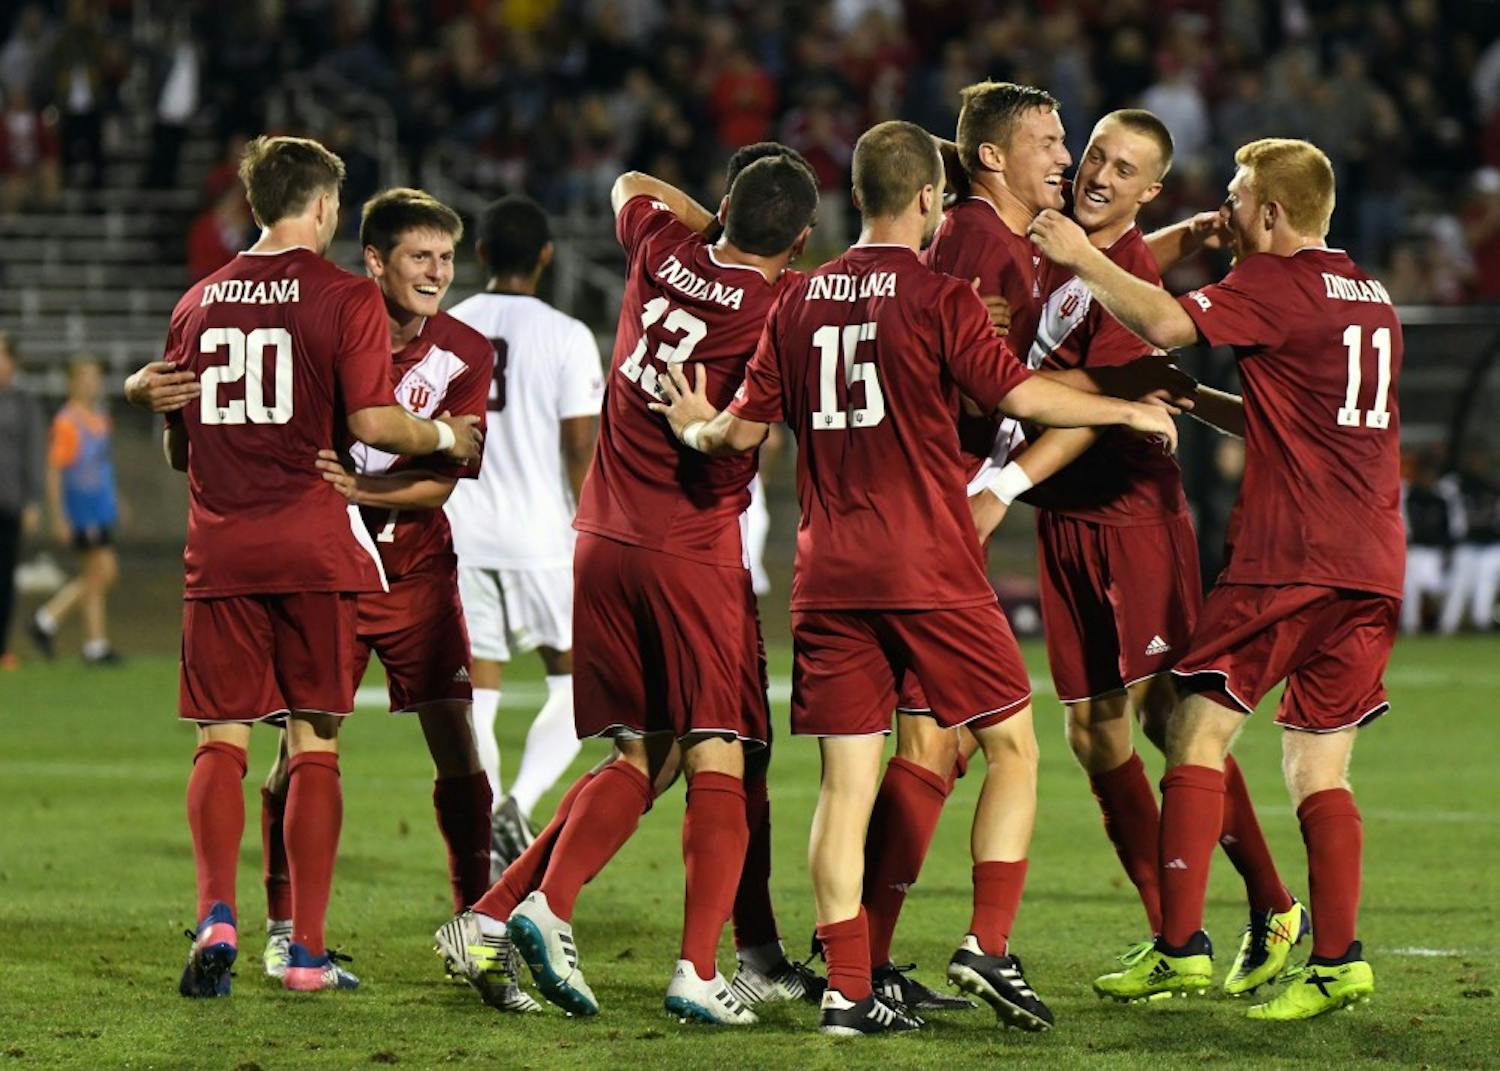 IU celebrates after senior defender Grant Lillard scores the first of IU's five goals against Santa Clara Sept. 30 at Bill Armstrong Stadium. IU will now begin the Big Ten Tournament Monday at 12 p.m. after a weather delay postponed the game from Sunday afternoon.